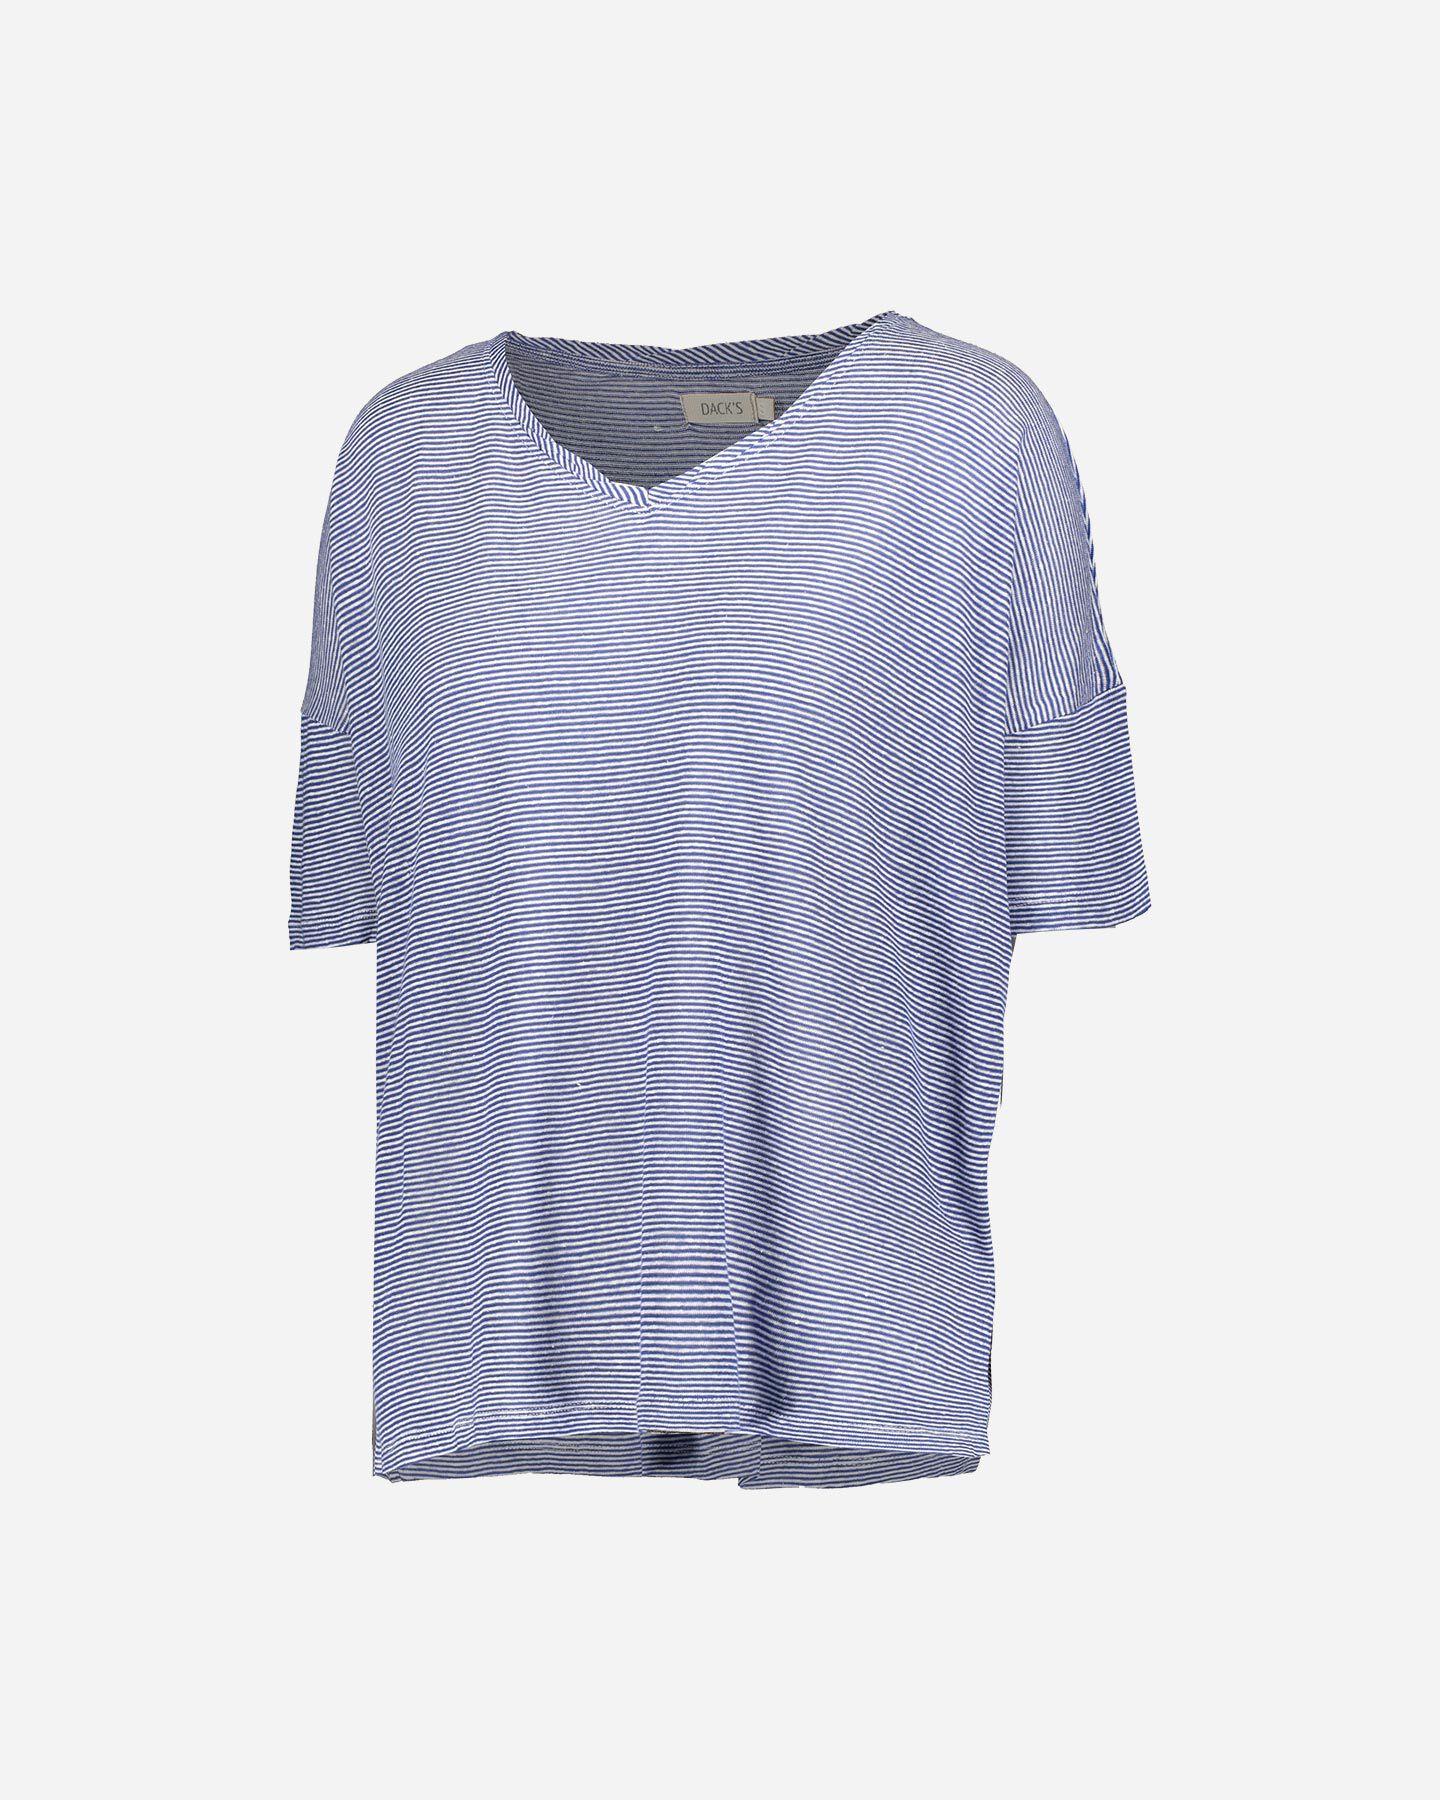  T-Shirt DACK'S LINEN W S4073822|001/536|S scatto 0